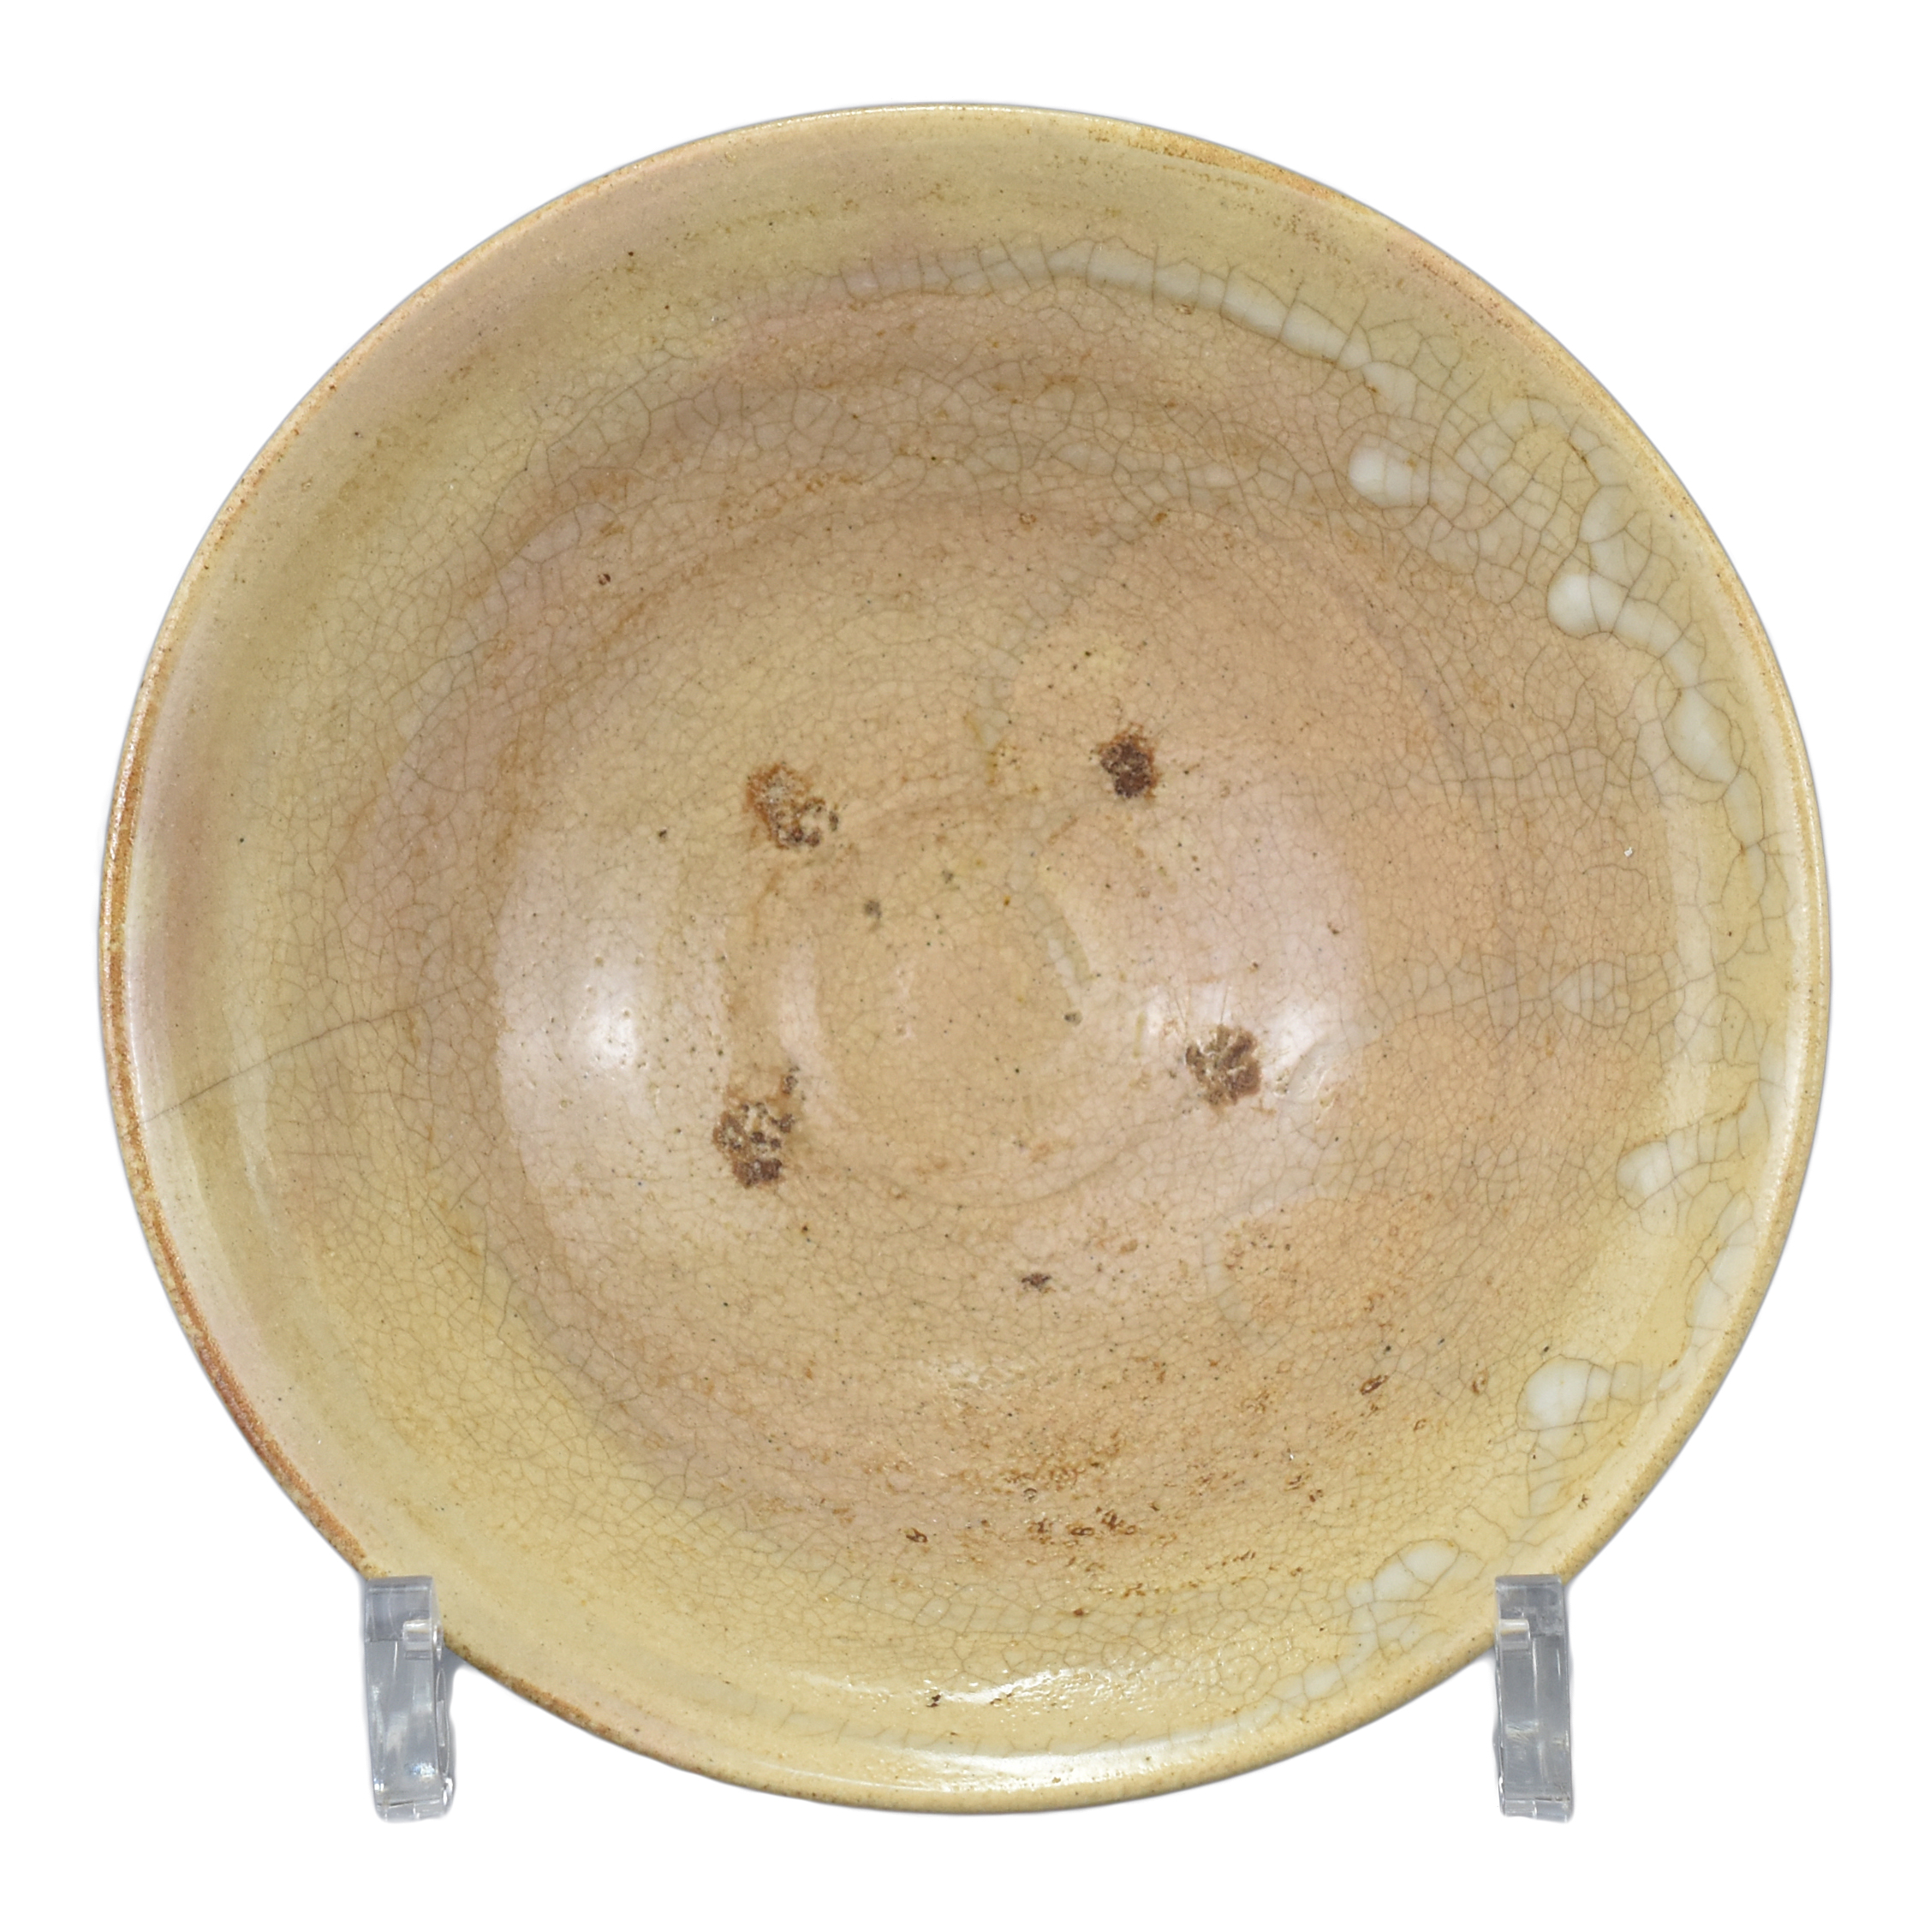 A Japanese or Korean Glazed Stoneware Bowl of Conical Form, 19th Century